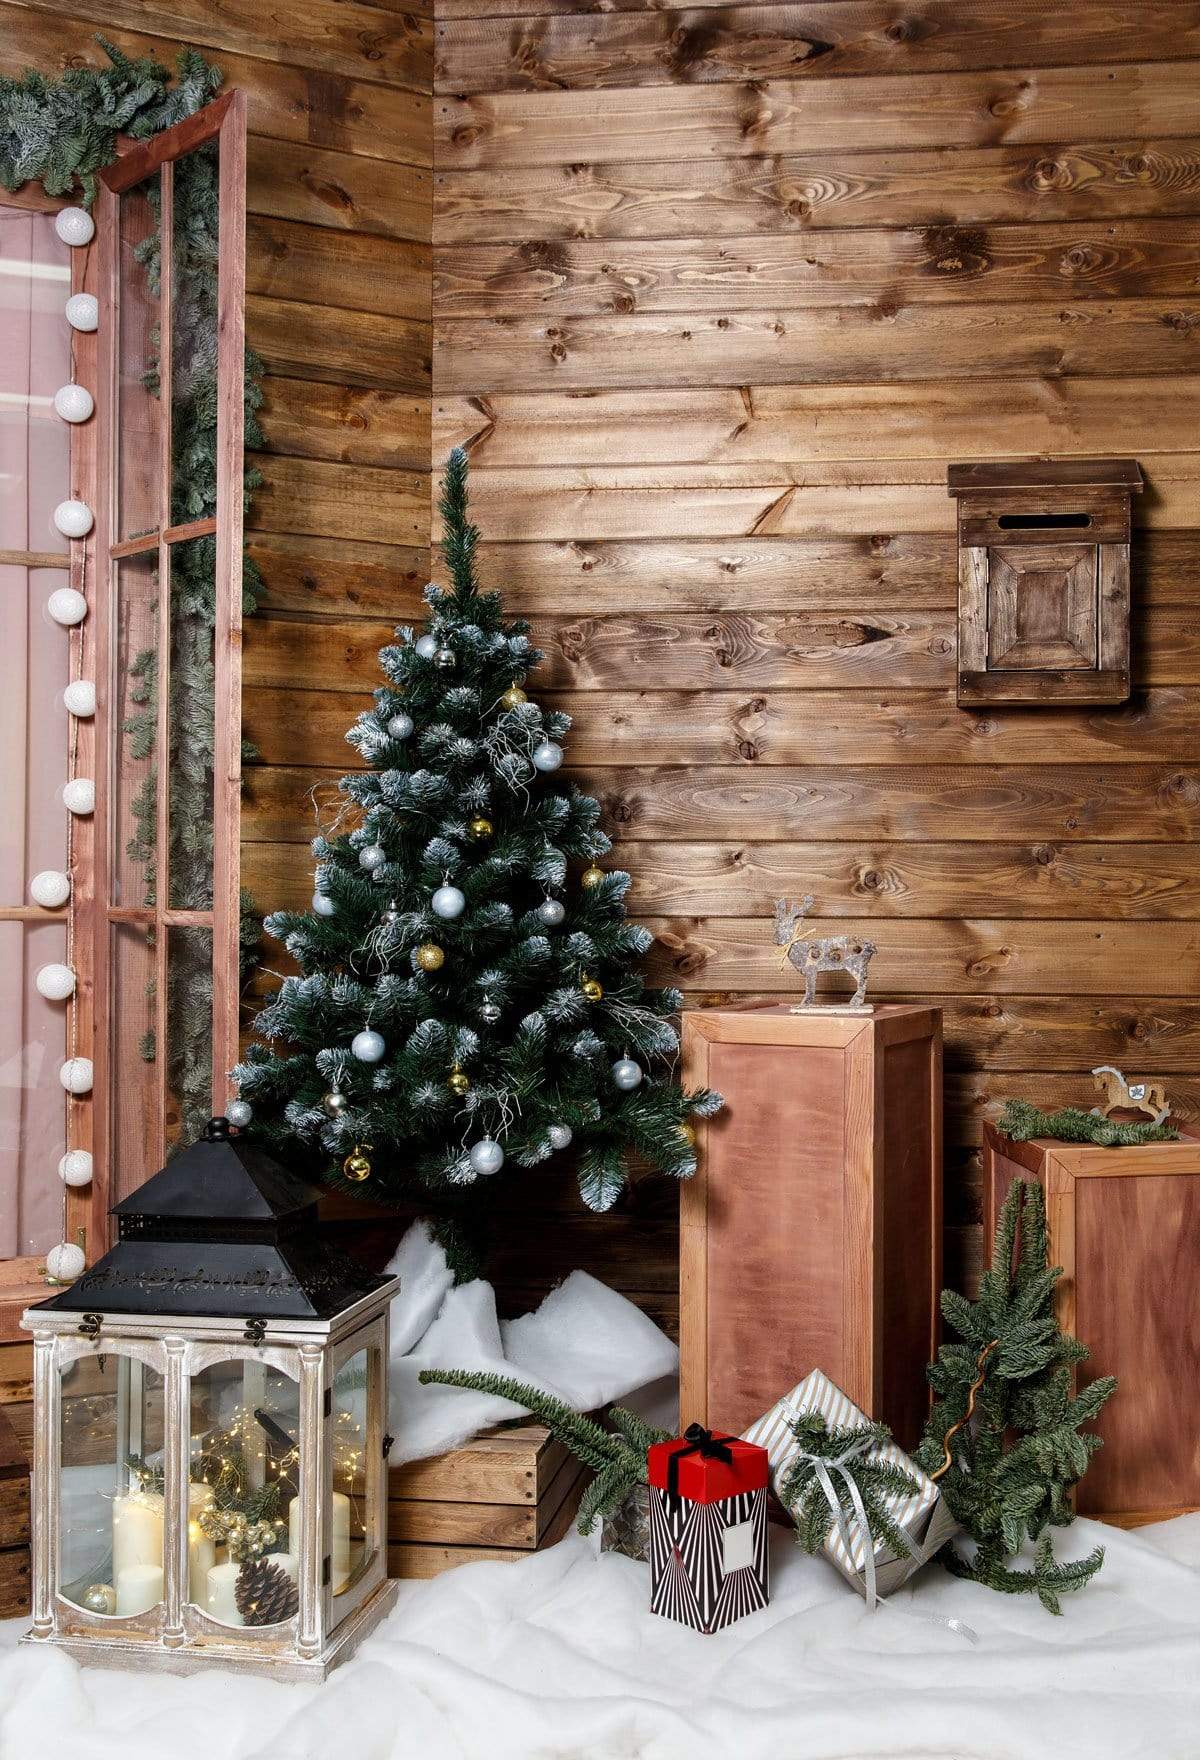 Katebackdrop：Kate Wood Wall And Christmas Tree With Decorations for Photography